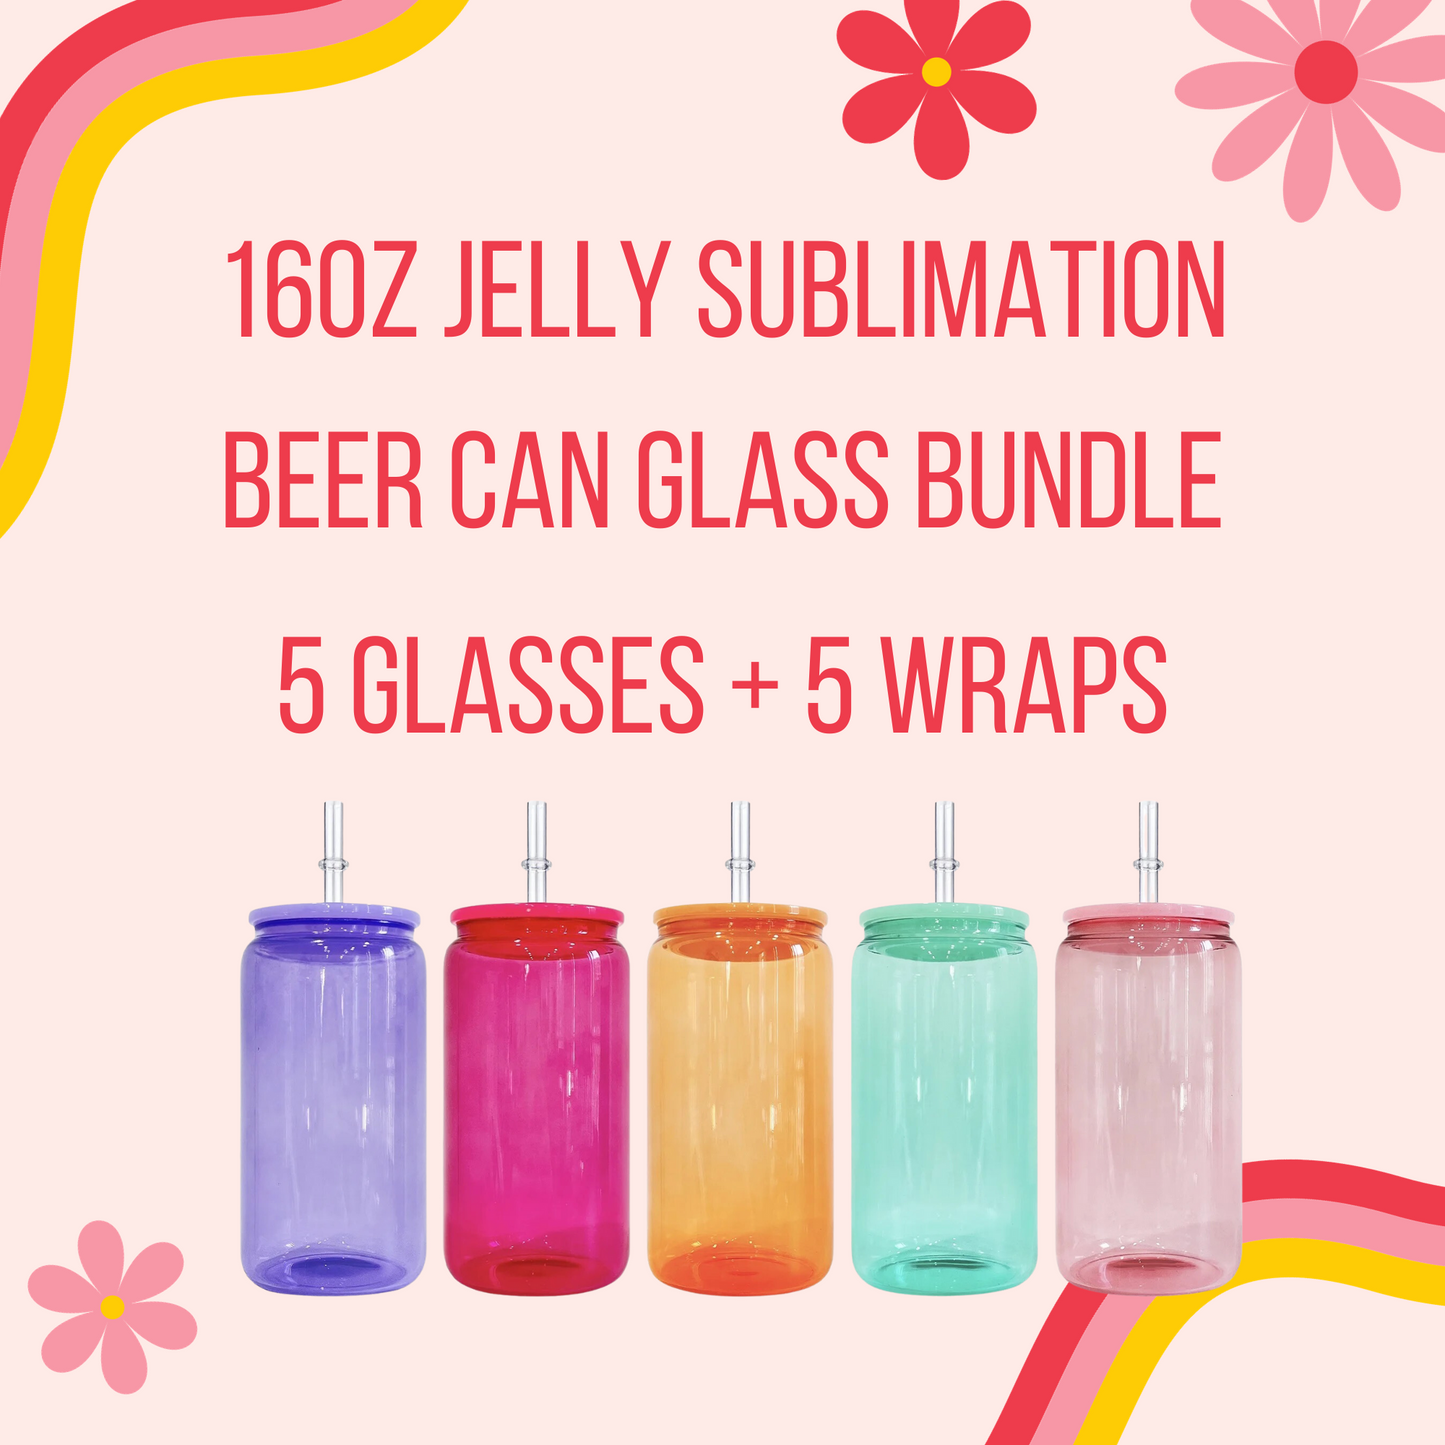 16oz Jelly Sublimation Beer Can Glass Bundle only $25